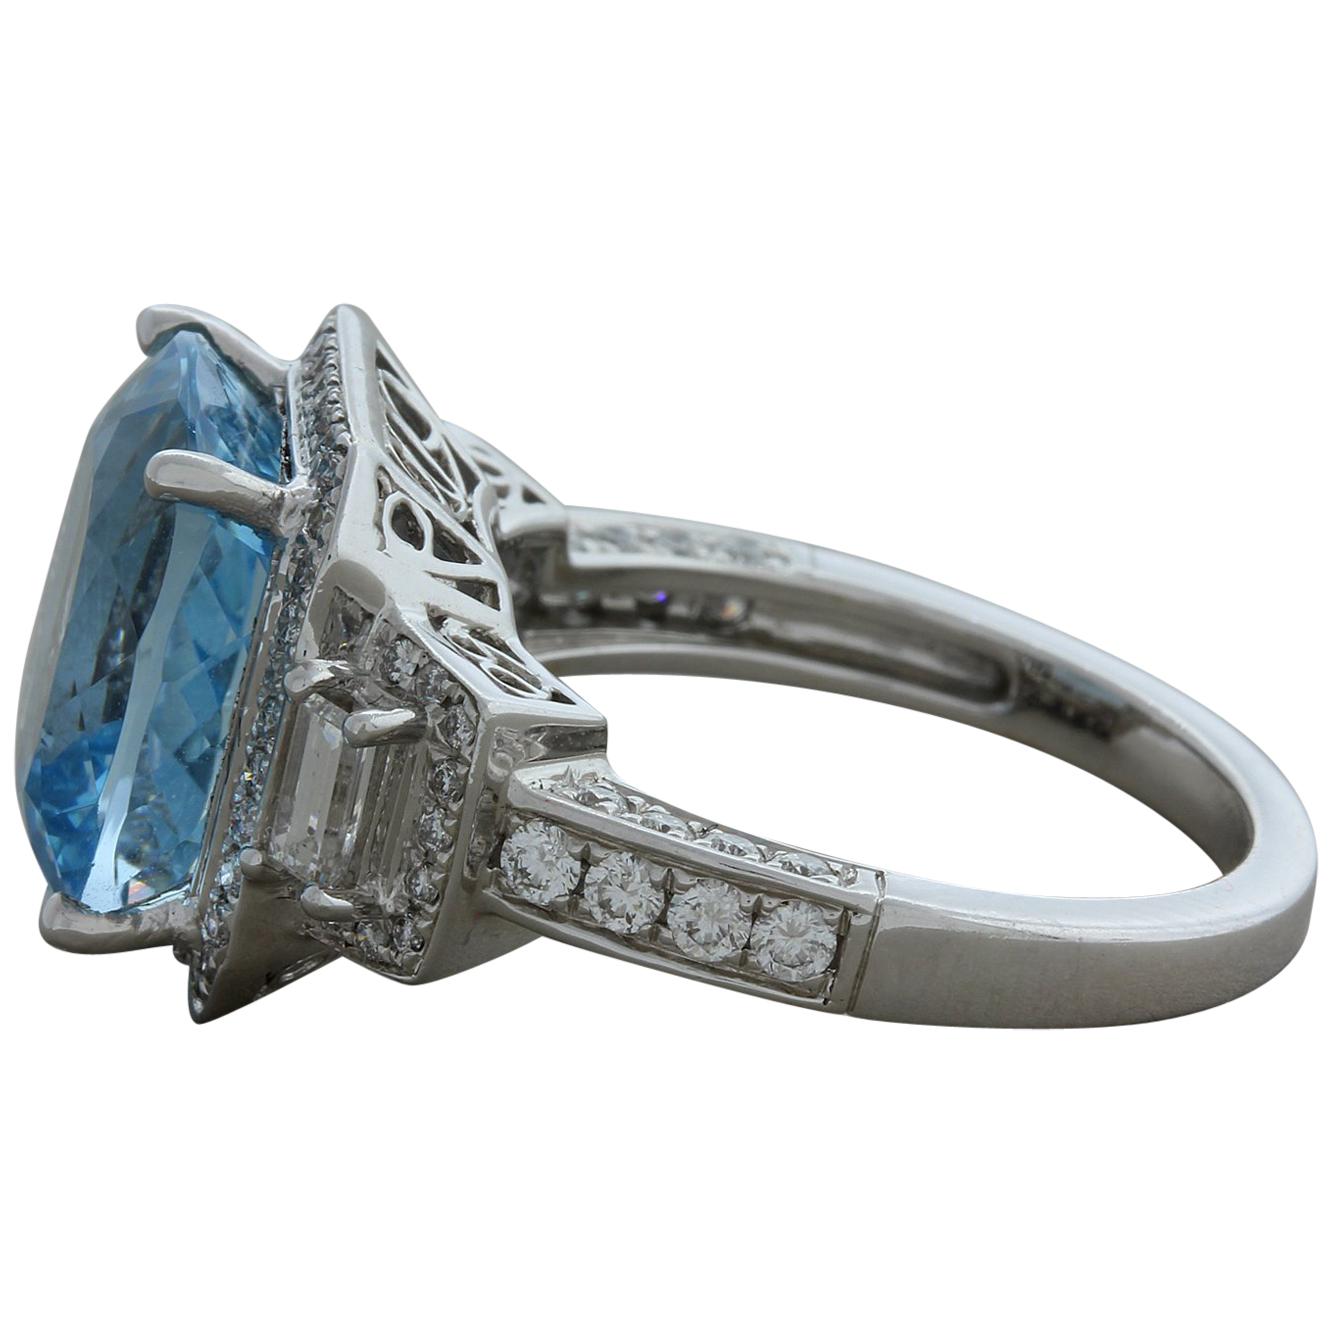 A classic cocktail ring featuring a 6.53 carat cushion cut aquamarine. The soft blue gemstone is accented by a halo of round brilliant cut diamonds as well as two large baguette cut diamonds set on both sides of the ring. There are also round cuts